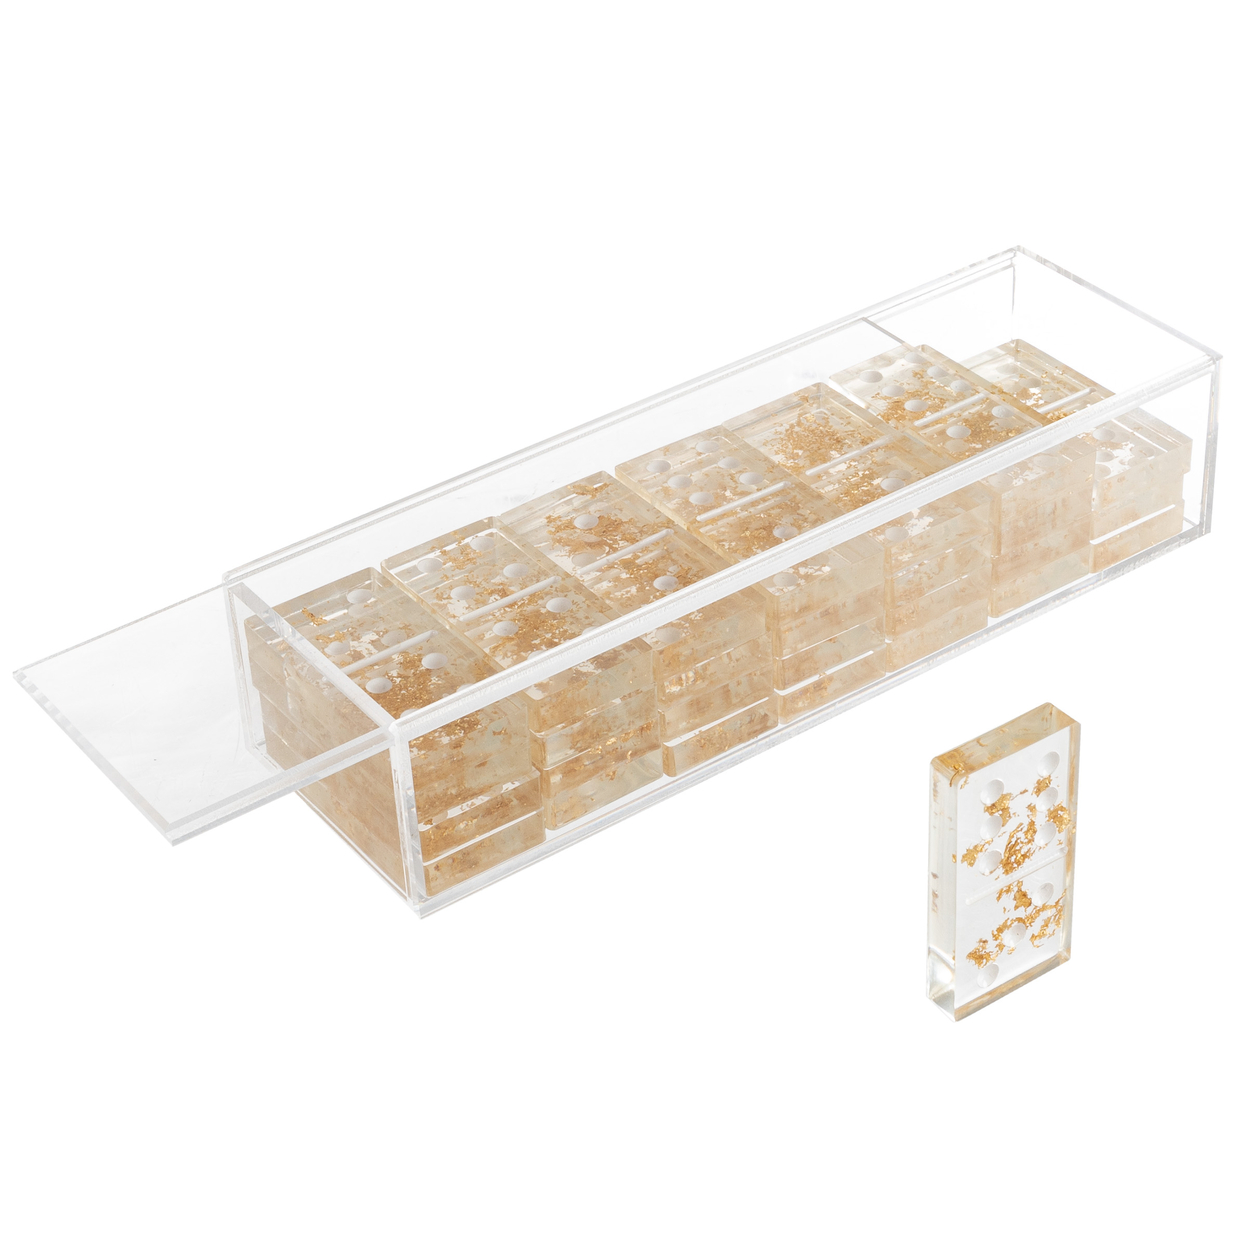 Acrylic Dominos Set - 28-Piece Gold Foil Domino Game With Display Box